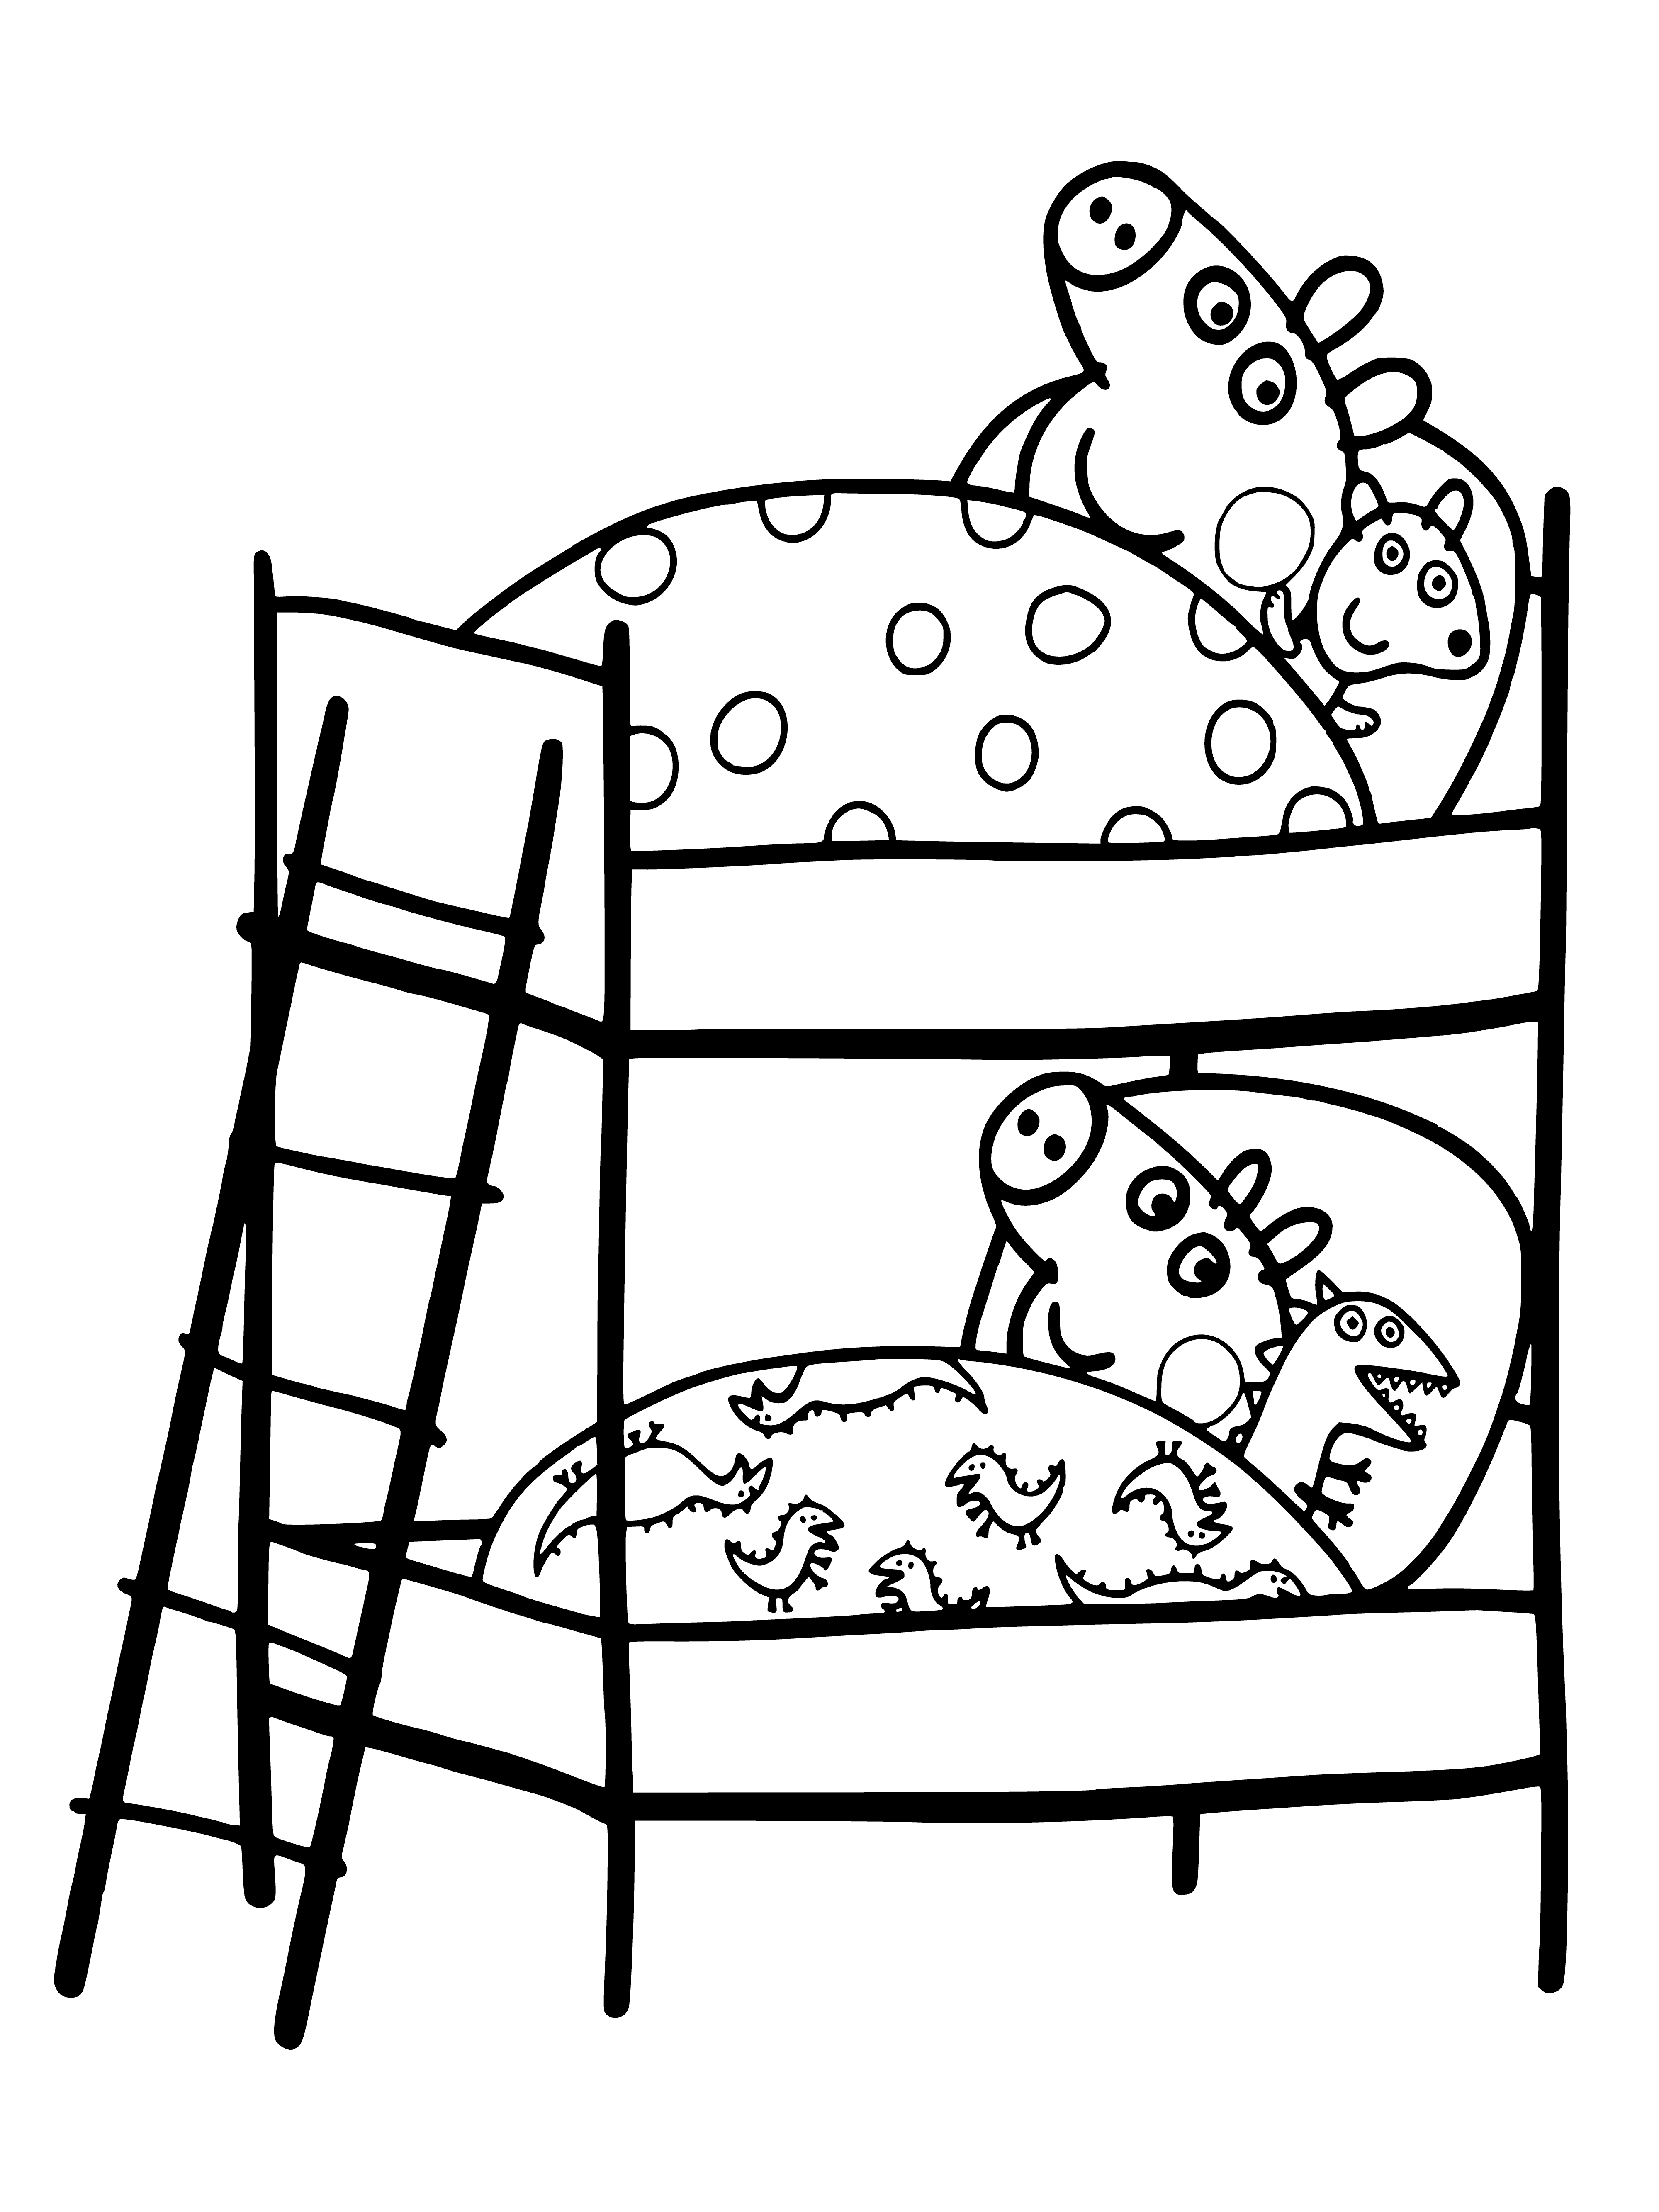 coloring page: George and Peppa cuddle in bed with a book and stuffed animal.